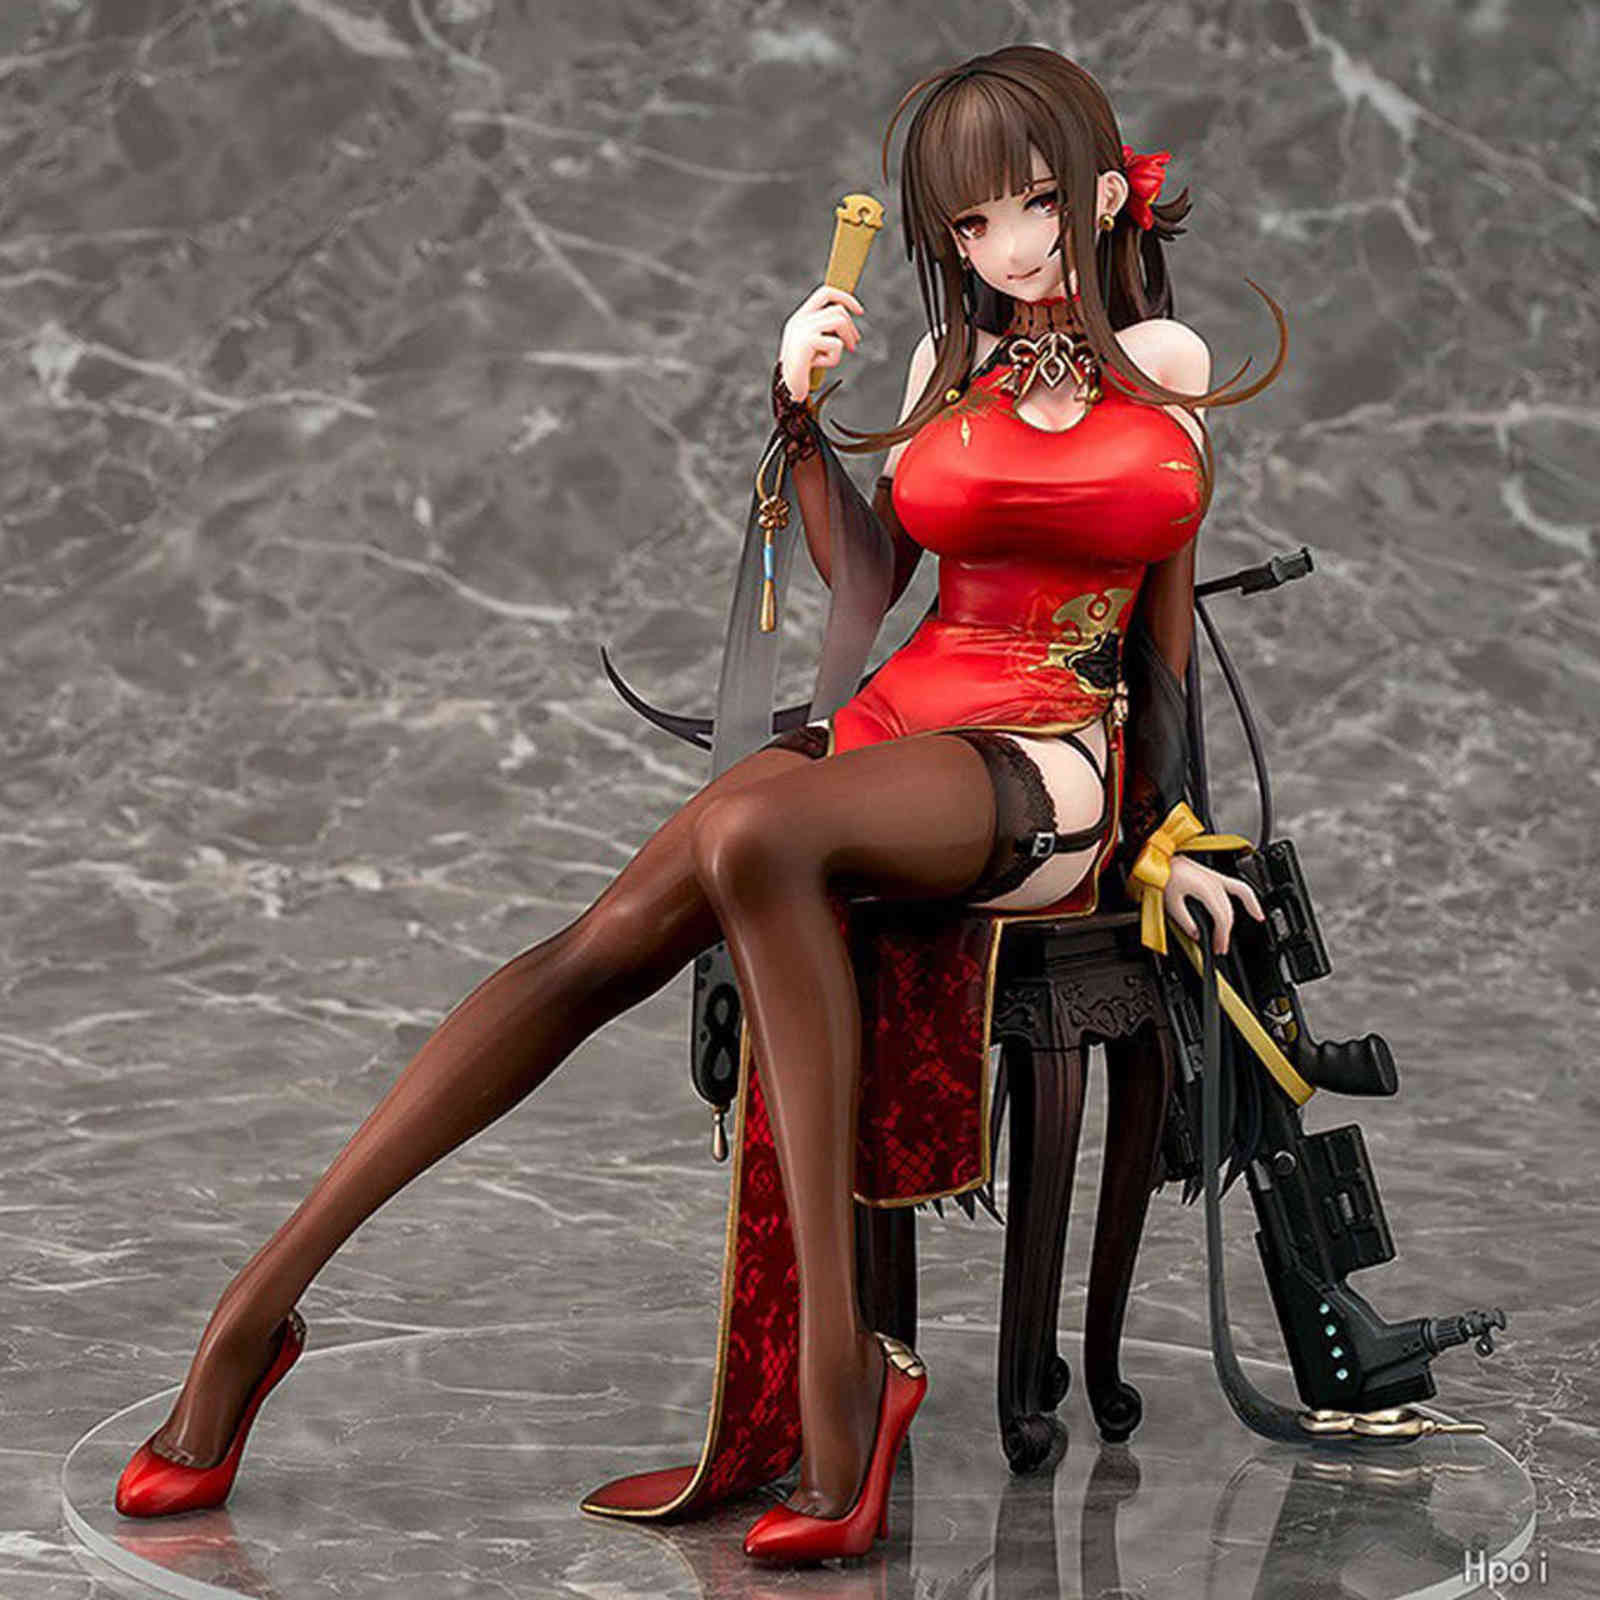 

Japanese Anime Girls Frontline Figure Moselle Kar 98k DSR-50 Phat PVC Action Figure Toy Soft Game Statue Collectible Model Doll H1105, No retail box